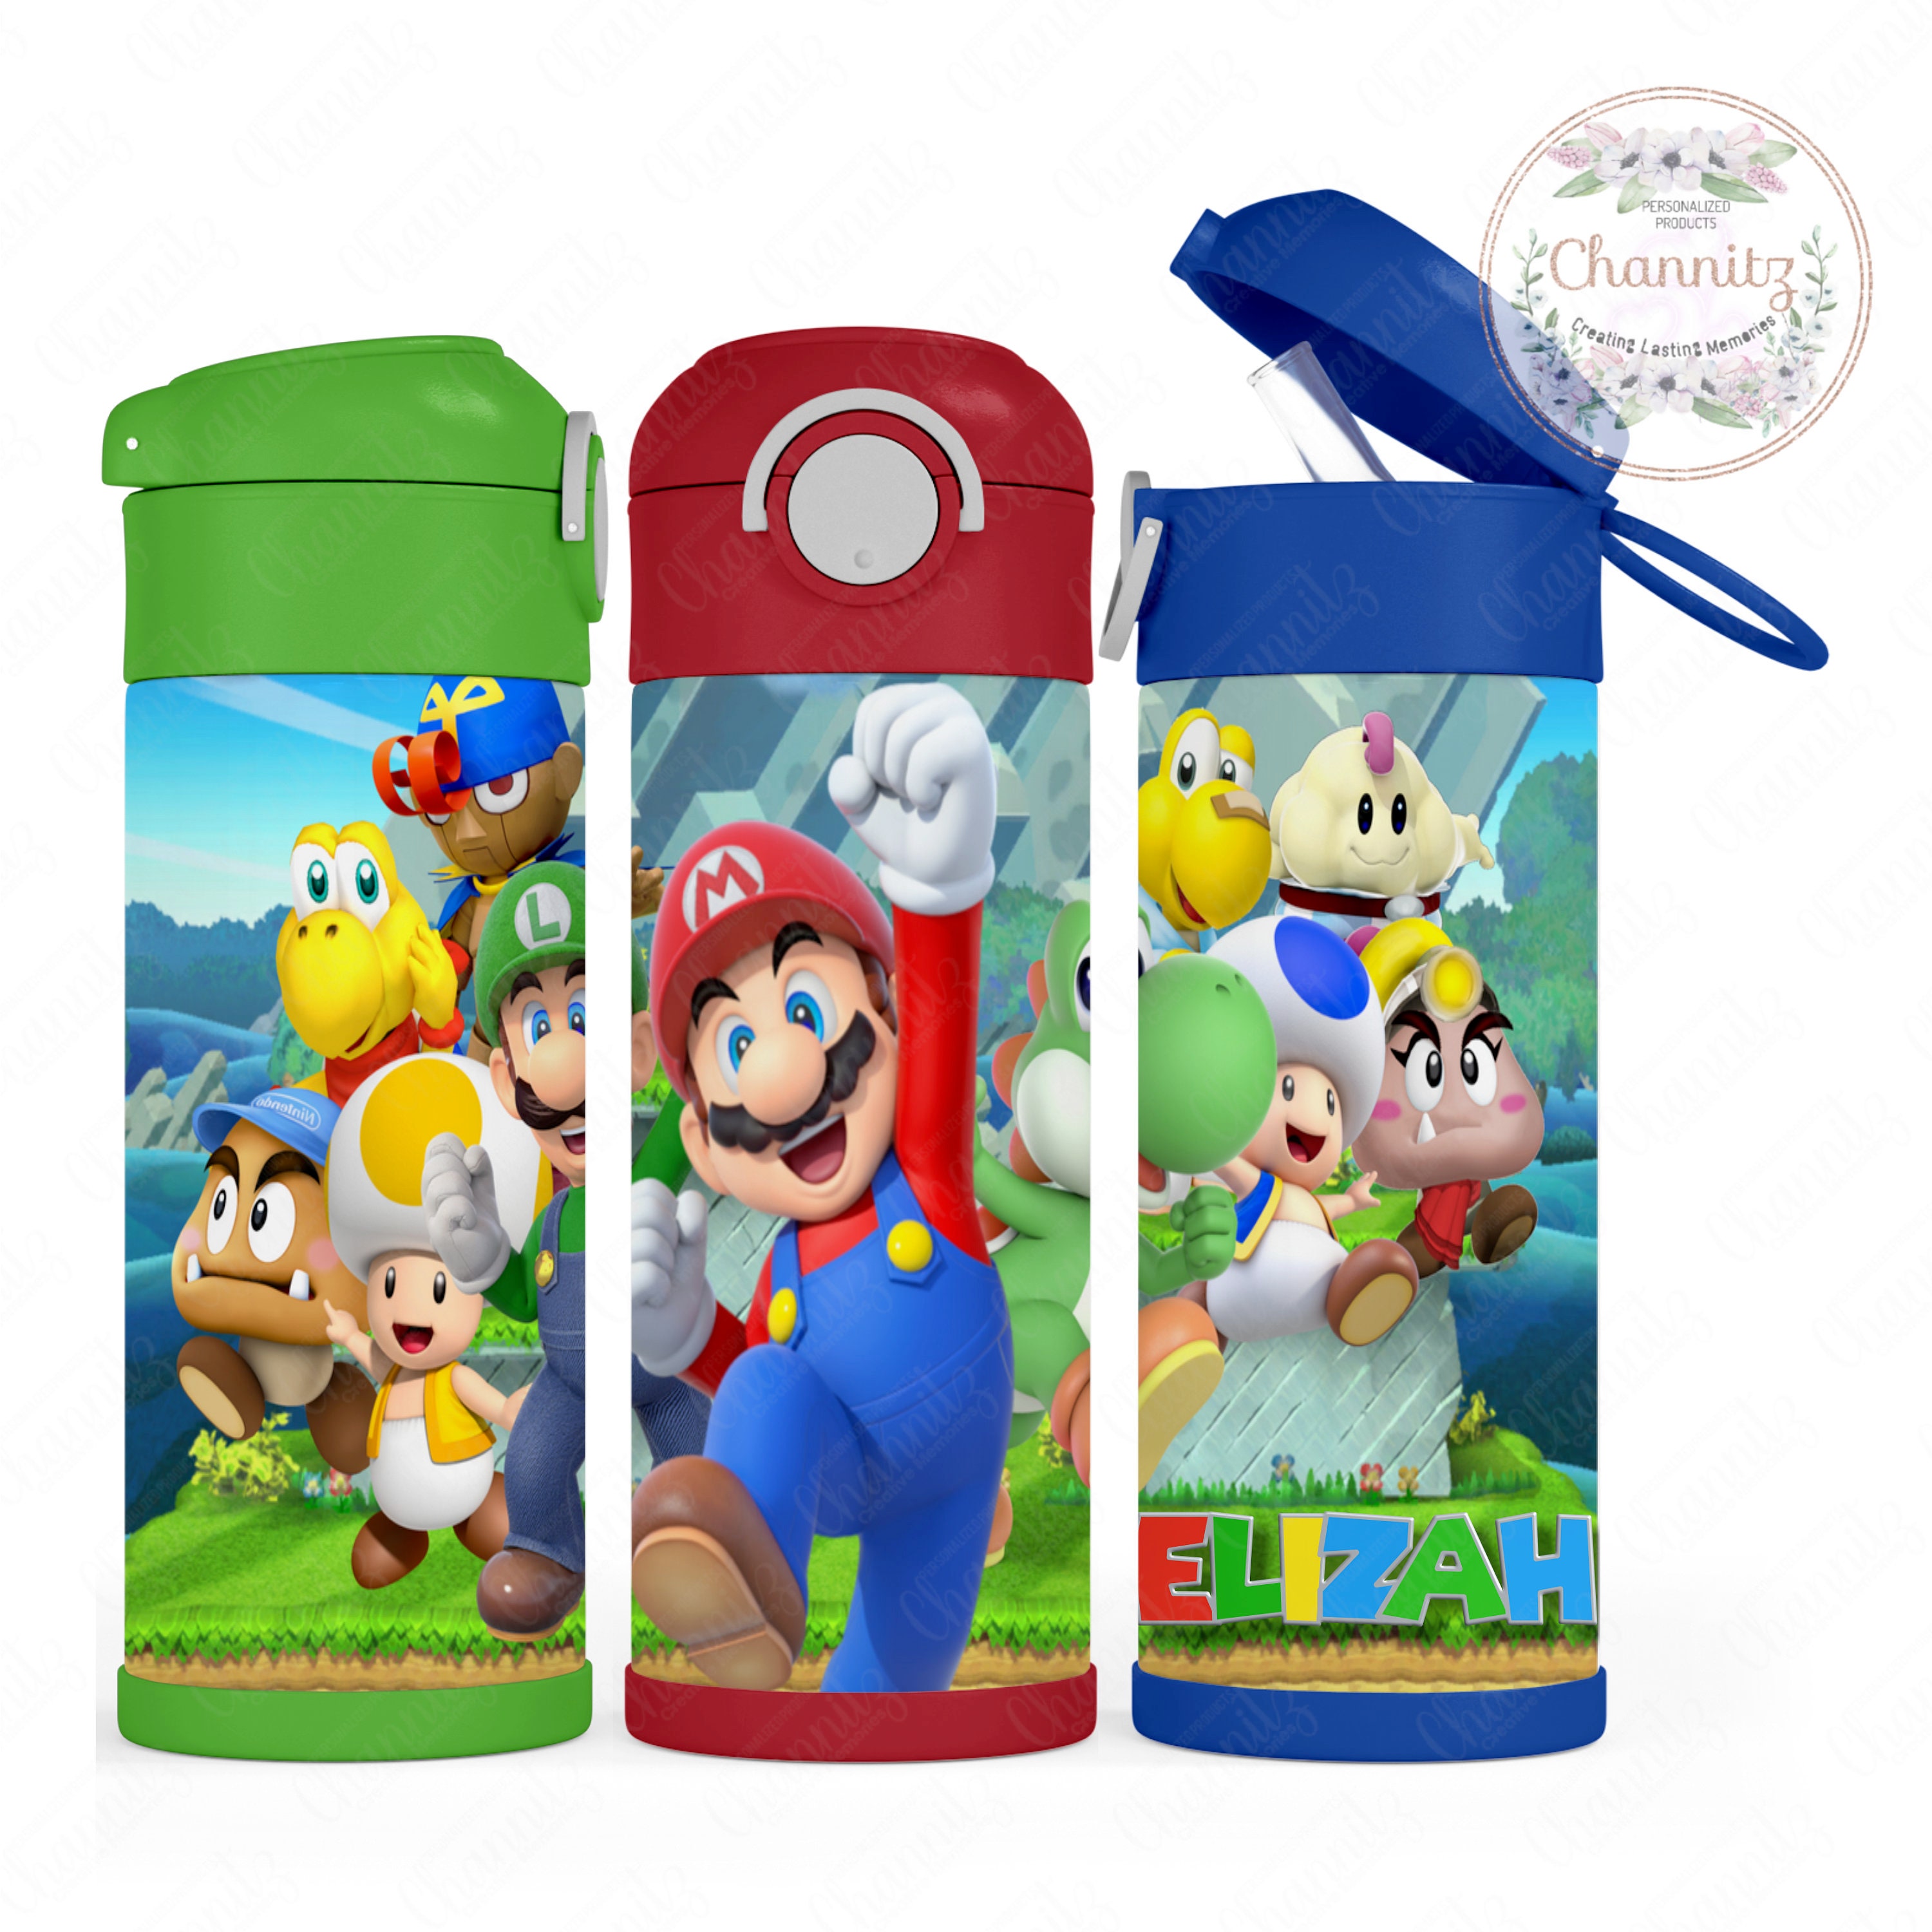 Trending Super Mario Bros Insulated Lunch Bag Leakproof Hot Cold